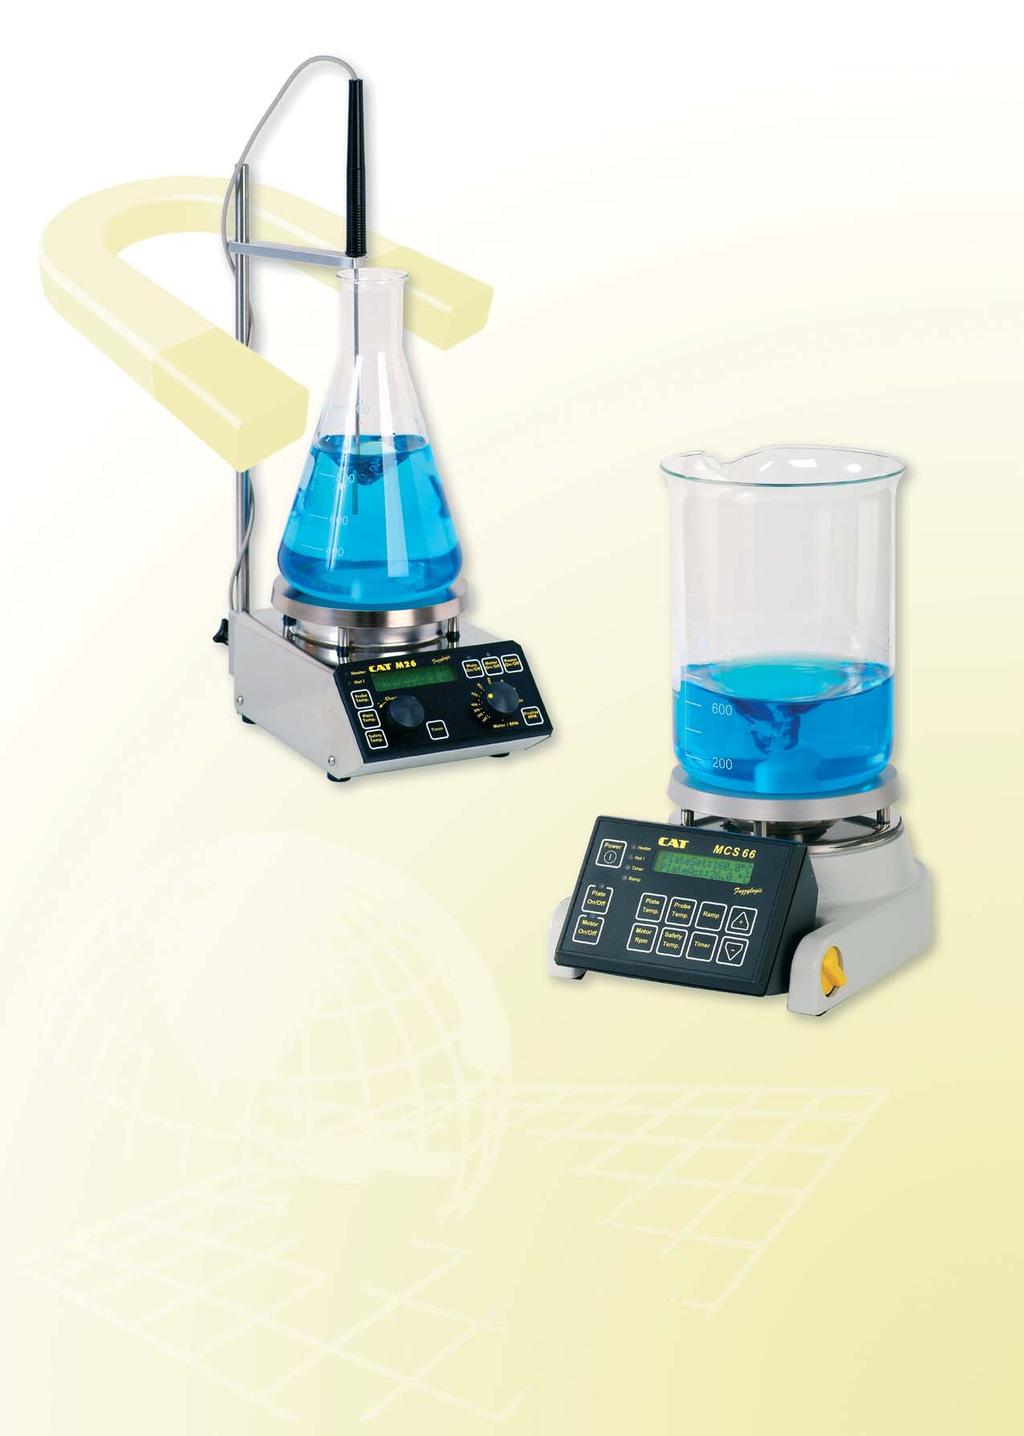 M. Zipperer GmbH From marketing knowledge to real innovation Magnetic Stirrers